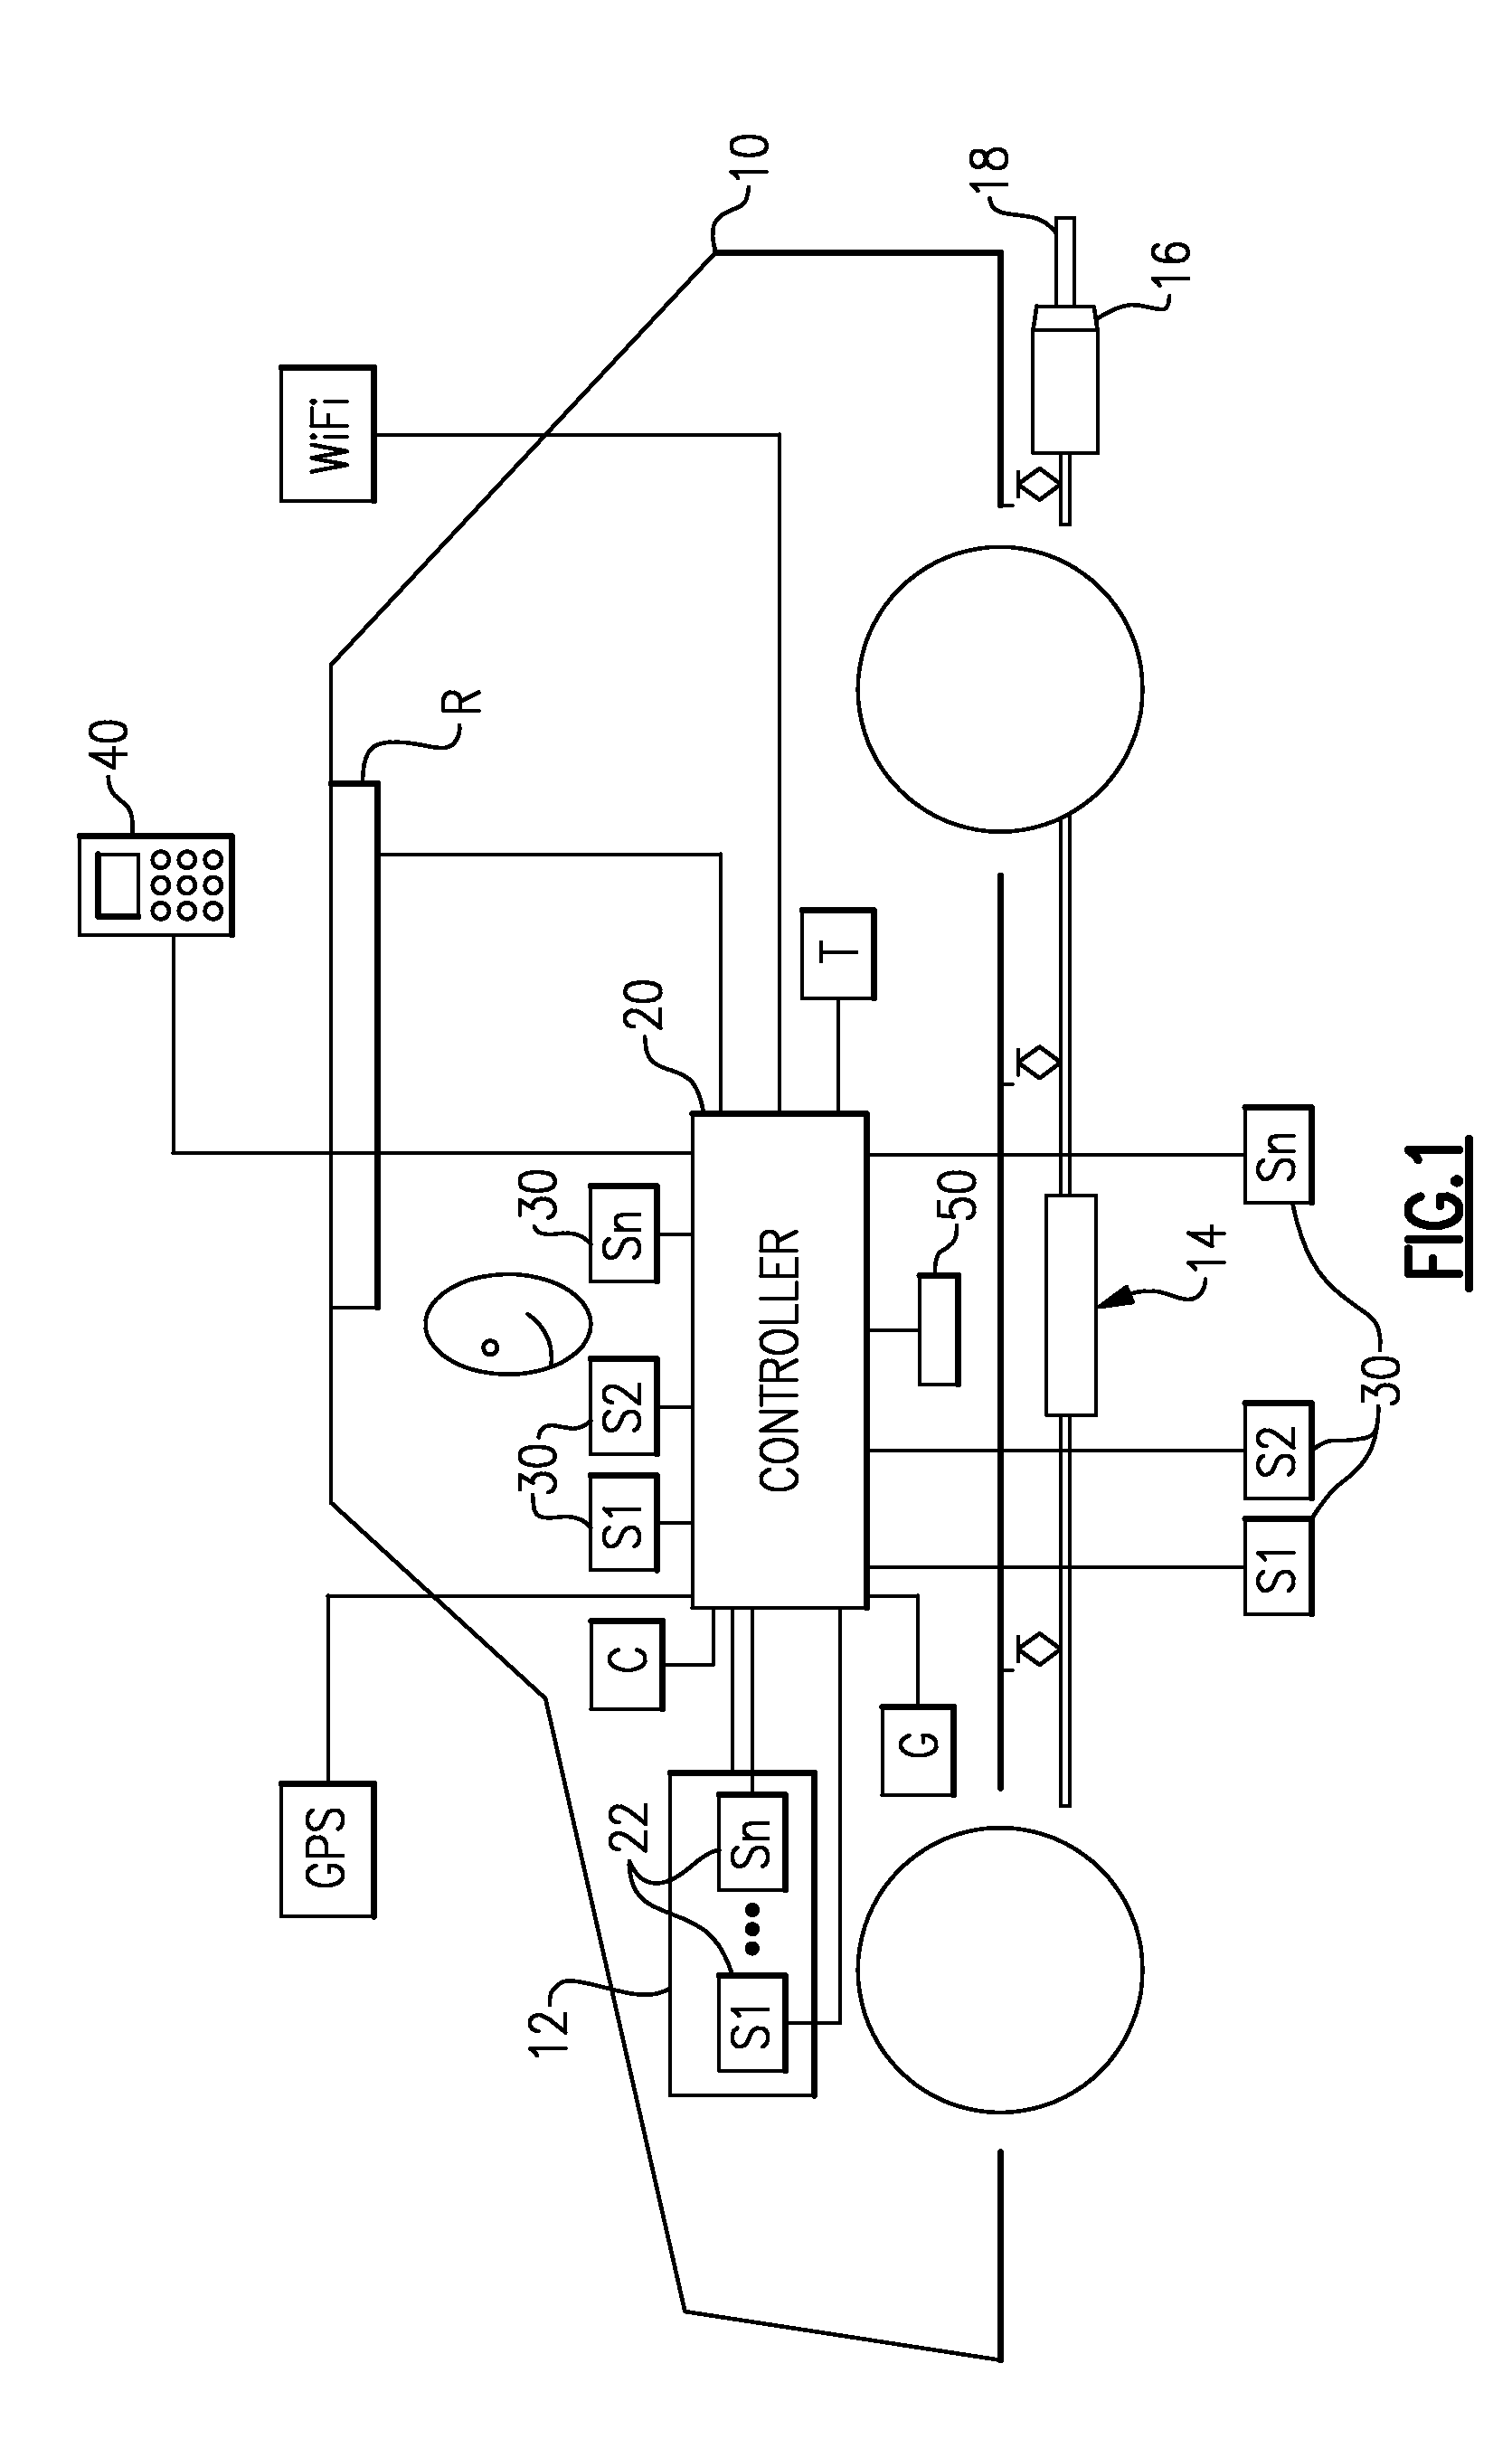 Active exhaust valve control strategy for improved fuel consumption